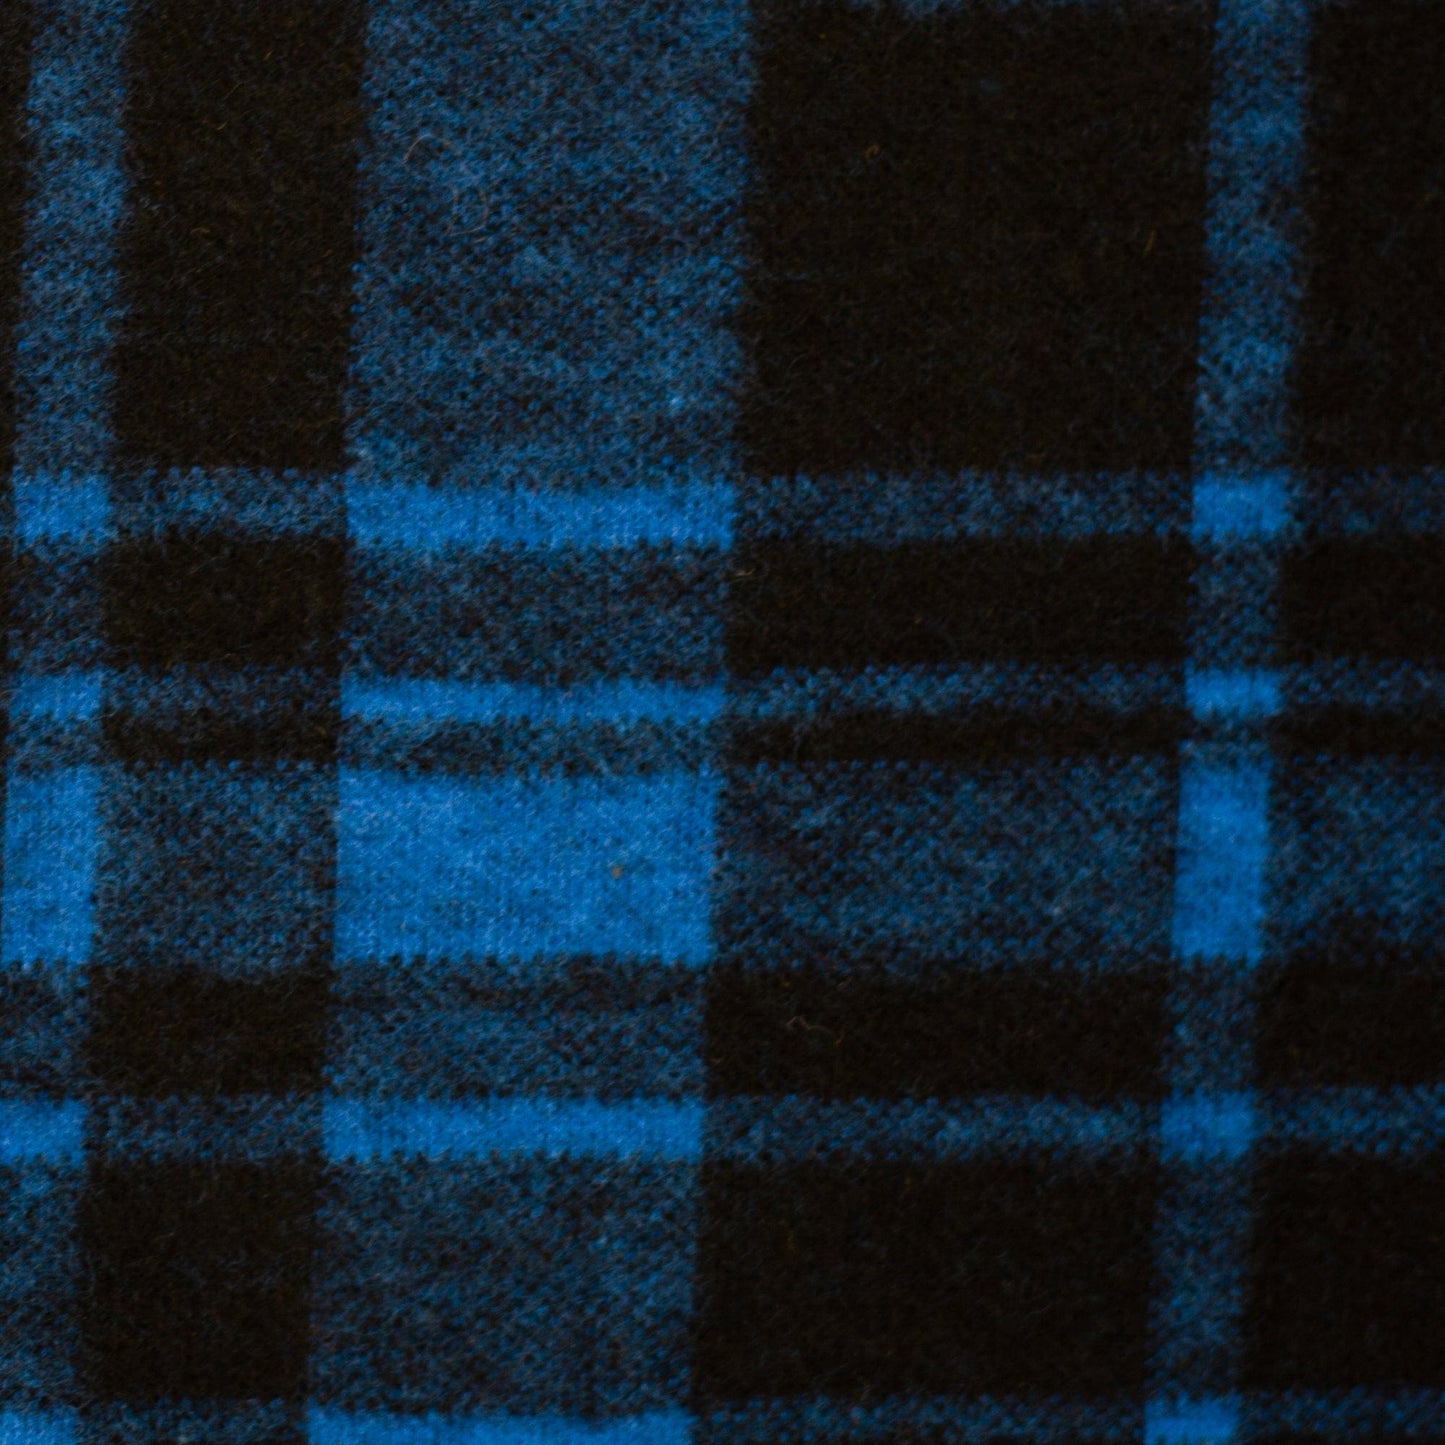 44cm Piece Pure Cotton Jacquard Jersey Knit with Blue and Black Check